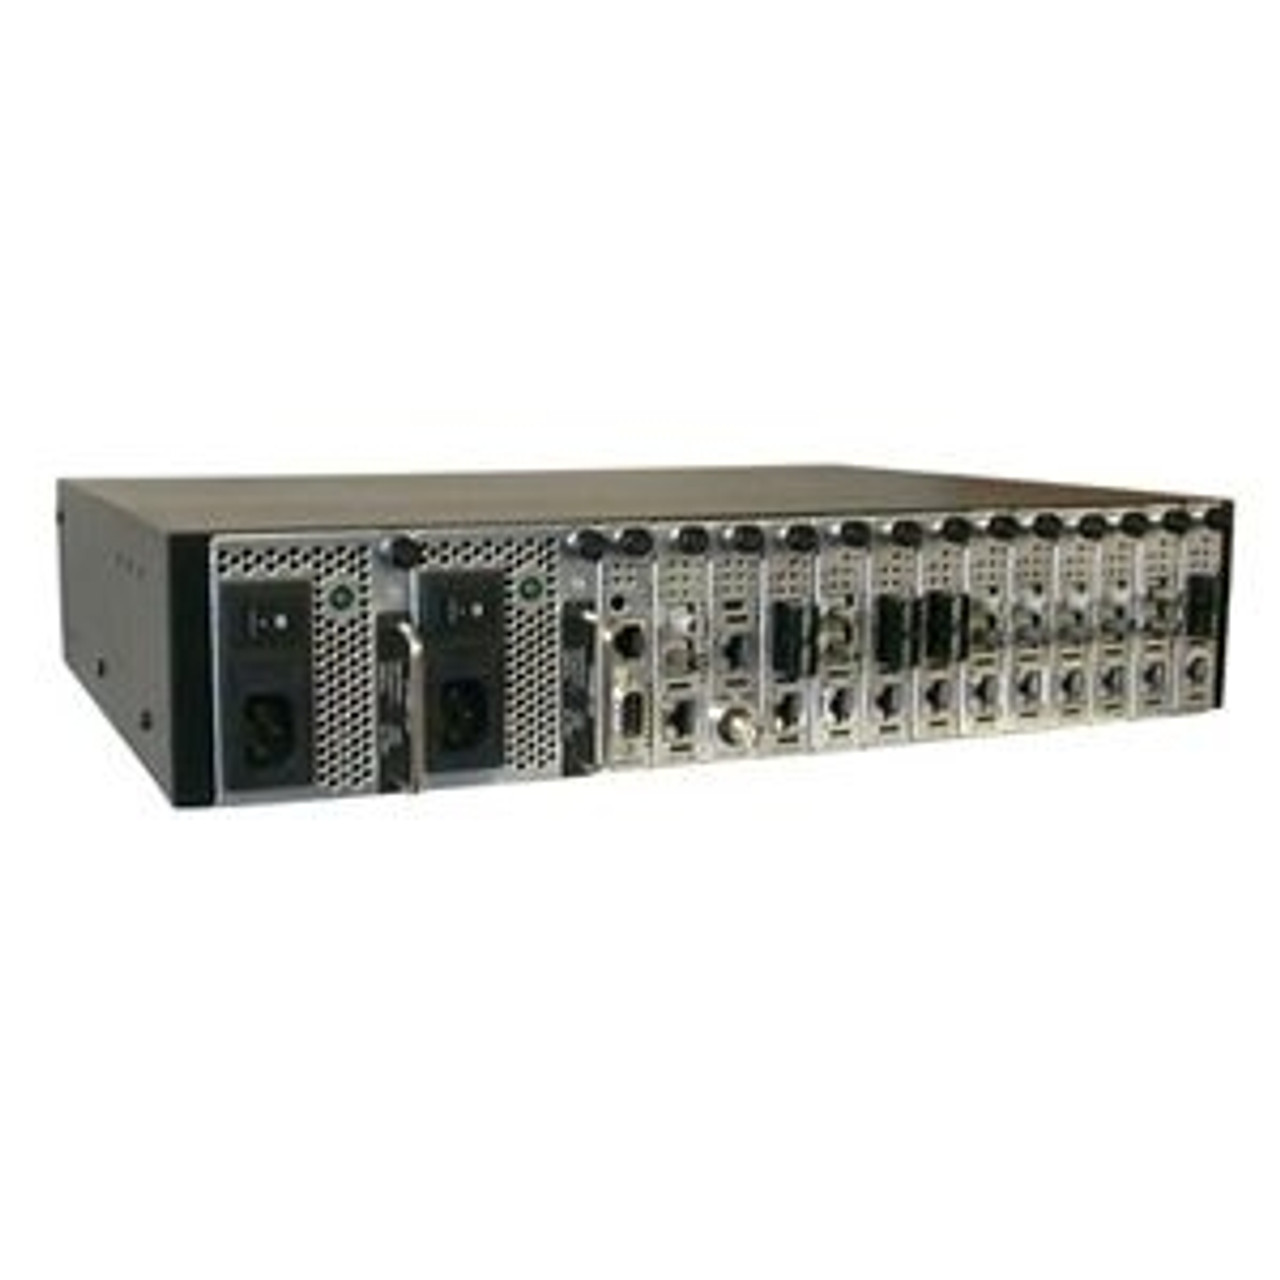 CPSMC1320-100 Transition 13-Slot with 24V DC Power Supply for Point System Chassis